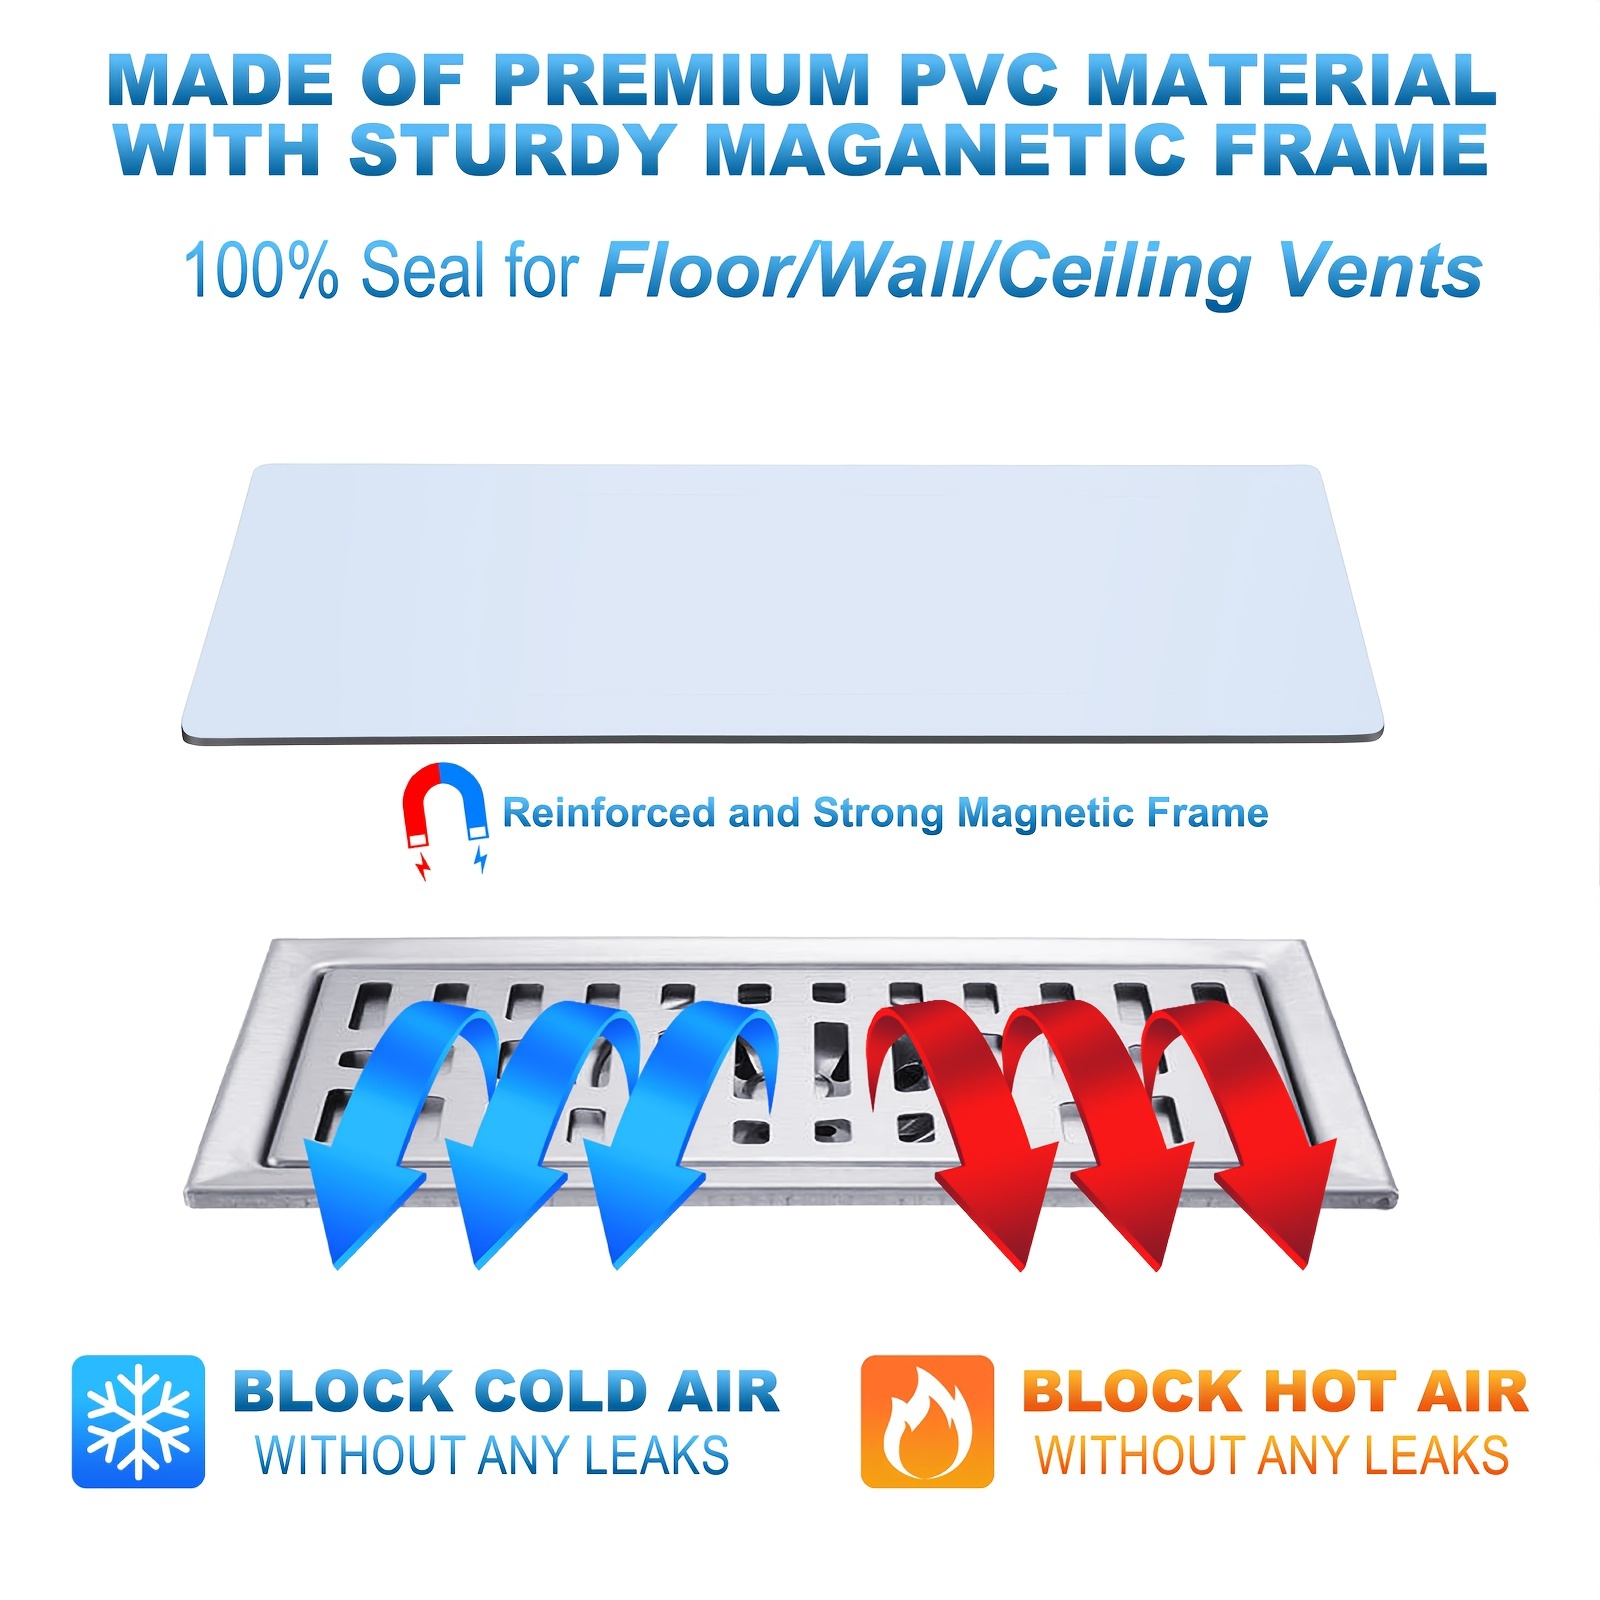 Magnetic Vent Covers for Home Floor Easily Cut Air Magnetic Vent Covers for  Ceiling Thick Register Vent Cover for Wall Ceiling RV, HVAC, Air